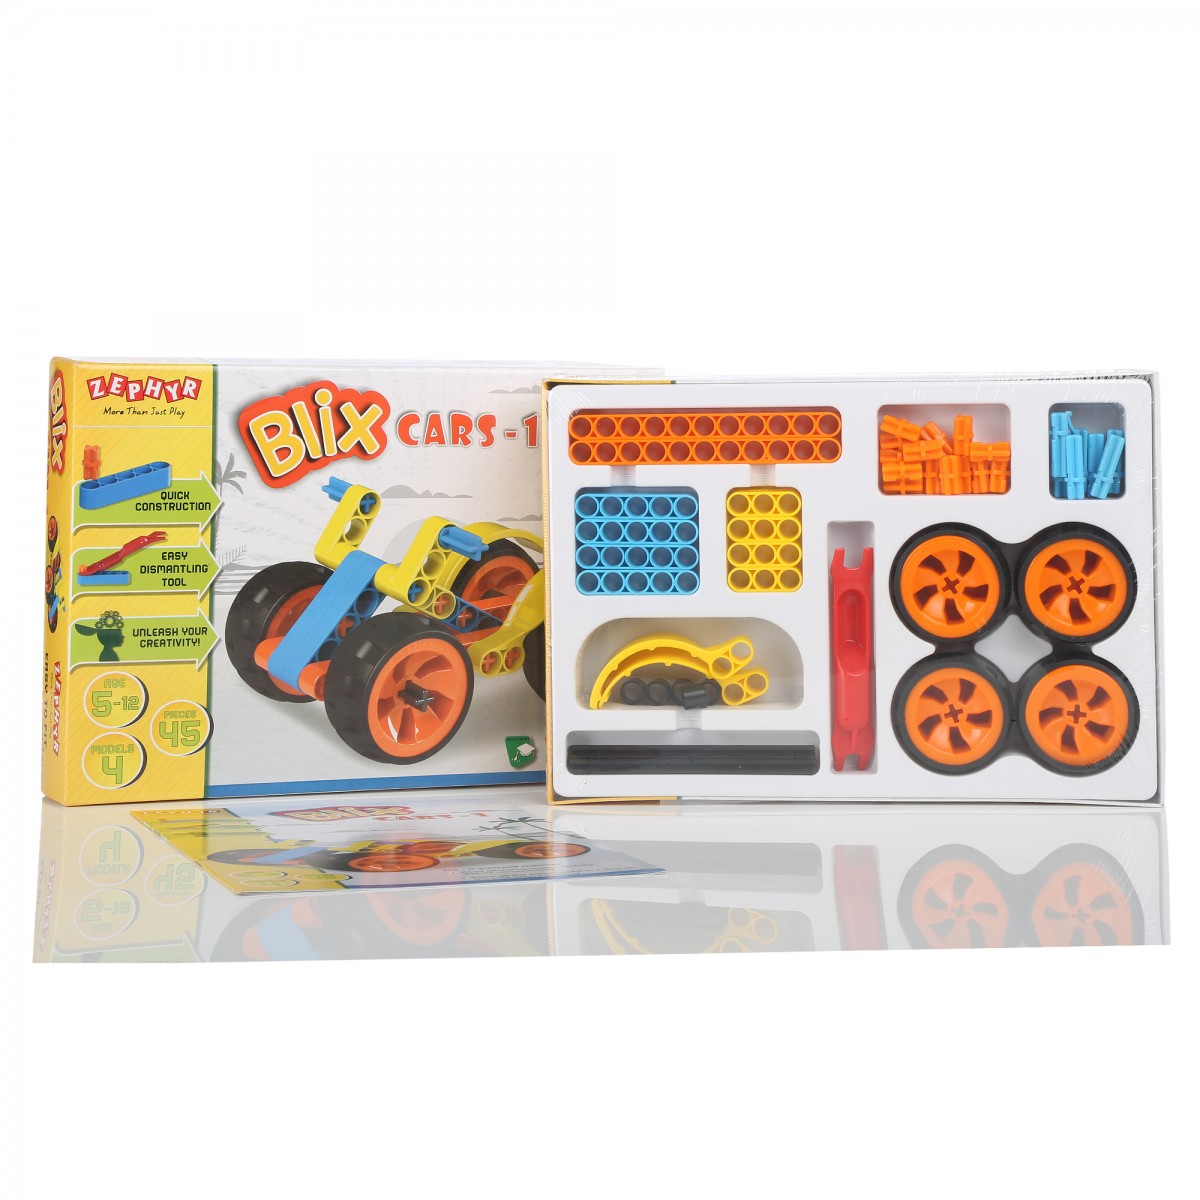 Zephyr Blix - Cars - 1 Diy, Educational, Learning, Stem, Building And Construction Toys, Multicolour, 8Y+